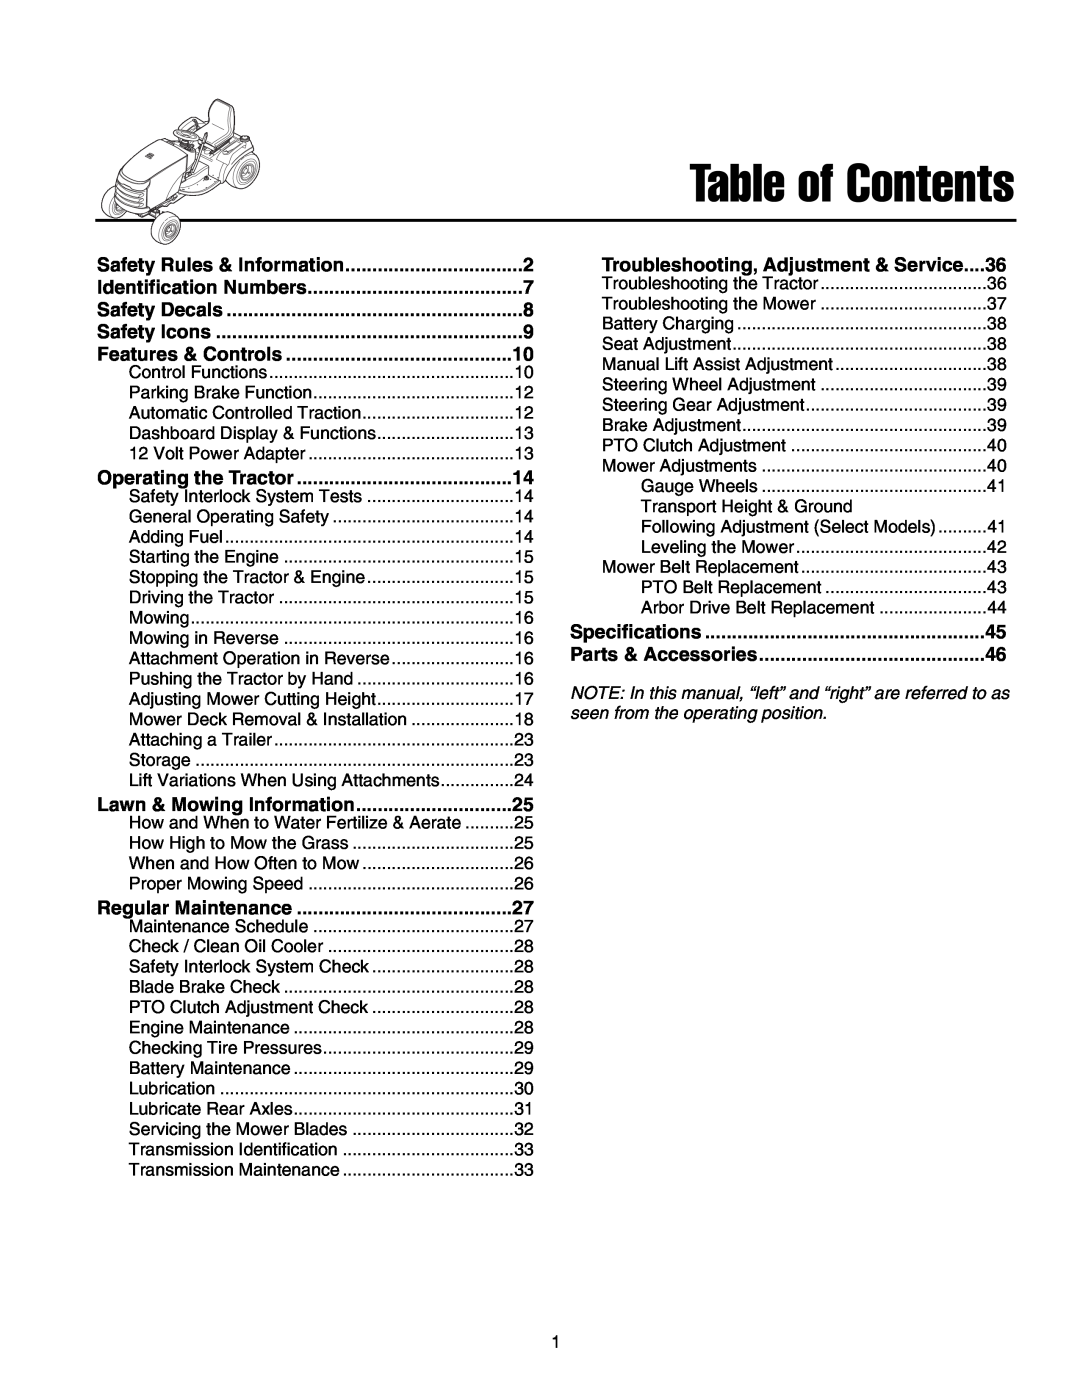 Snapper 1700, 2700, 400 manual Table of Contents, Lawn & Mowing Information, Features & Controls, Regular Maintenance 